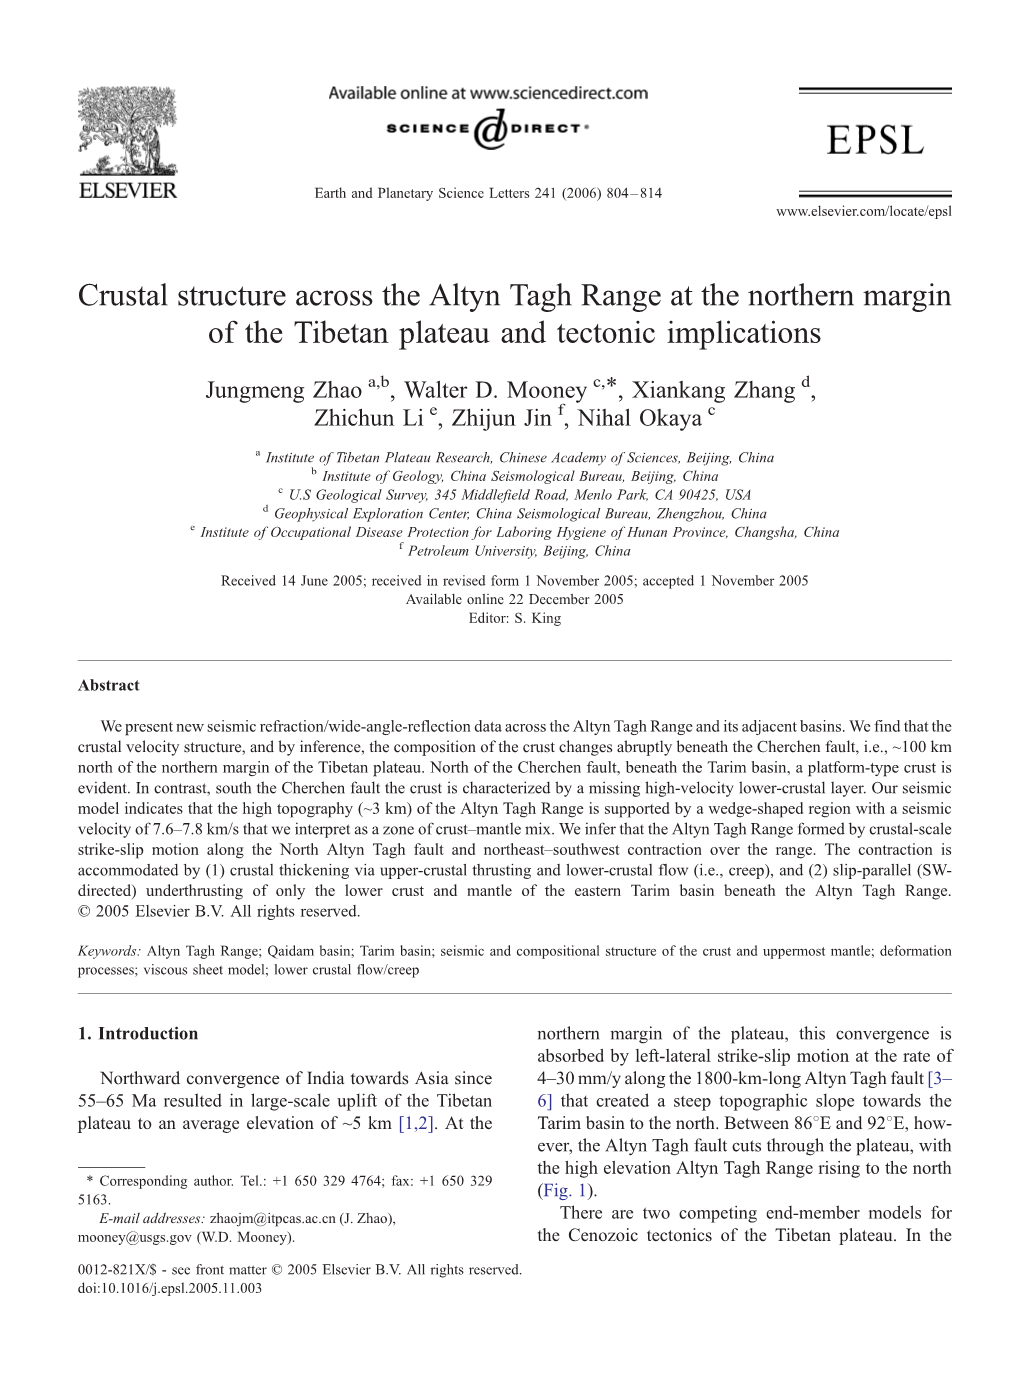 Crustal Structure Across the Altyn Tagh Range at the Northern Margin of the Tibetan Plateau and Tectonic Implications